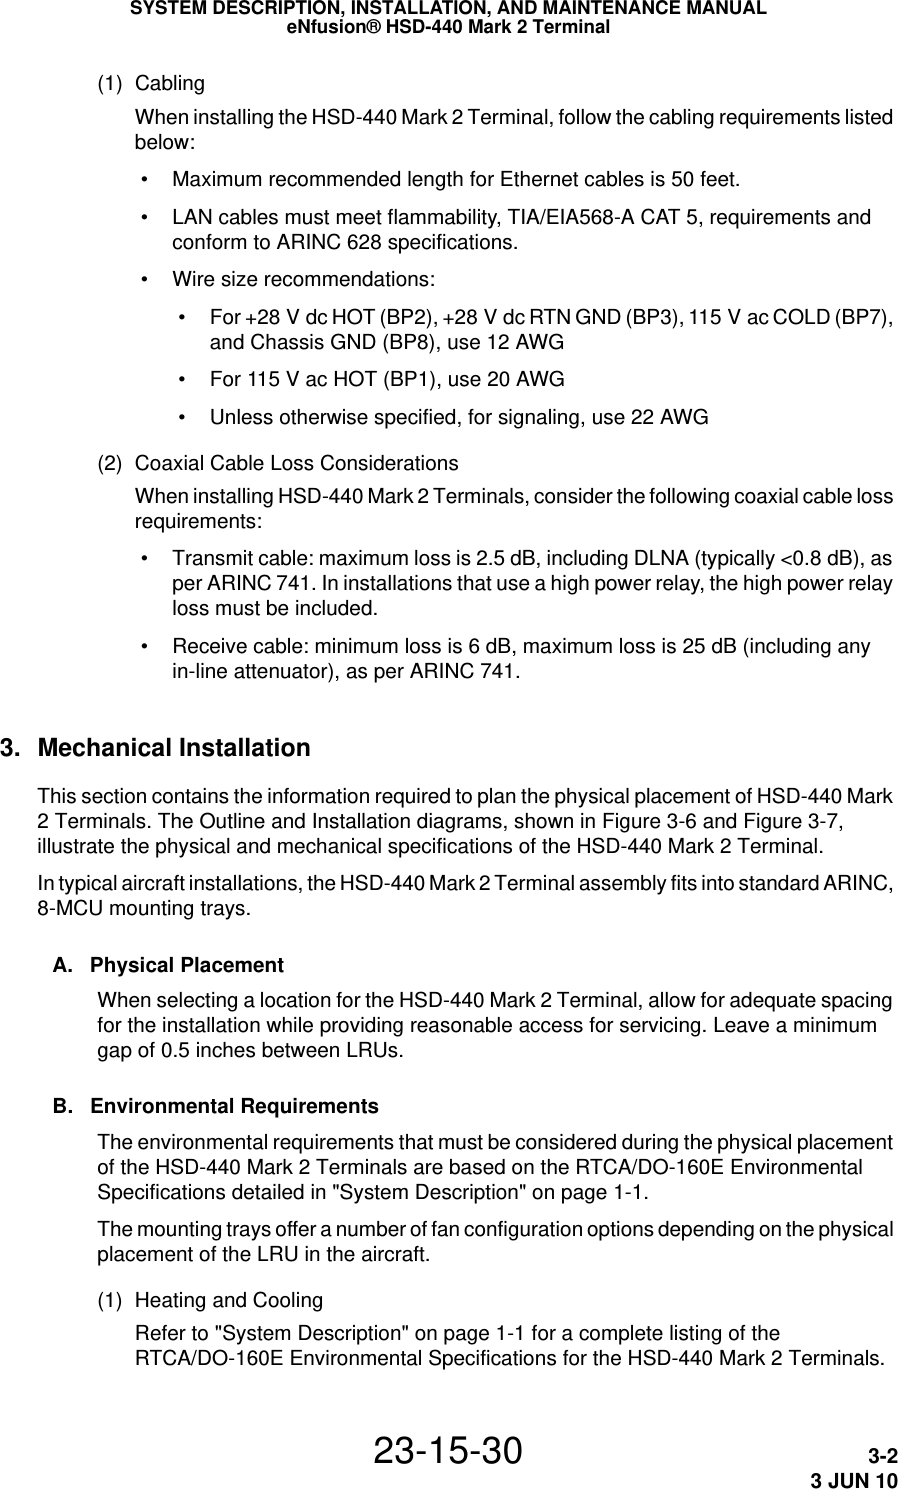 SYSTEM DESCRIPTION, INSTALLATION, AND MAINTENANCE MANUALeNfusion® HSD-440 Mark 2 Terminal23-15-30 3-23 JUN 10(1) CablingWhen installing the HSD-440 Mark 2 Terminal, follow the cabling requirements listed below: • Maximum recommended length for Ethernet cables is 50 feet.  • LAN cables must meet flammability, TIA/EIA568-A CAT 5, requirements and conform to ARINC 628 specifications.  • Wire size recommendations: •For +28 V dc HOT (BP2), +28 V dc RTN GND (BP3), 115 V ac COLD (BP7), and Chassis GND (BP8), use 12 AWG •For 115 V ac HOT (BP1), use 20 AWG • Unless otherwise specified, for signaling, use 22 AWG(2) Coaxial Cable Loss ConsiderationsWhen installing HSD-440 Mark 2 Terminals, consider the following coaxial cable loss requirements: • Transmit cable: maximum loss is 2.5 dB, including DLNA (typically &lt;0.8 dB), as per ARINC 741. In installations that use a high power relay, the high power relay loss must be included. • Receive cable: minimum loss is 6 dB, maximum loss is 25 dB (including any in-line attenuator), as per ARINC 741.3. Mechanical InstallationThis section contains the information required to plan the physical placement of HSD-440 Mark 2 Terminals. The Outline and Installation diagrams, shown in Figure 3-6 and Figure 3-7, illustrate the physical and mechanical specifications of the HSD-440 Mark 2 Terminal.In typical aircraft installations, the HSD-440 Mark 2 Terminal assembly fits into standard ARINC, 8-MCU mounting trays.A. Physical PlacementWhen selecting a location for the HSD-440 Mark 2 Terminal, allow for adequate spacing for the installation while providing reasonable access for servicing. Leave a minimum gap of 0.5 inches between LRUs. B. Environmental RequirementsThe environmental requirements that must be considered during the physical placement of the HSD-440 Mark 2 Terminals are based on the RTCA/DO-160E Environmental Specifications detailed in &quot;System Description&quot; on page 1-1.The mounting trays offer a number of fan configuration options depending on the physical placement of the LRU in the aircraft. (1) Heating and CoolingRefer to &quot;System Description&quot; on page 1-1 for a complete listing of the RTCA/DO-160E Environmental Specifications for the HSD-440 Mark 2 Terminals. 